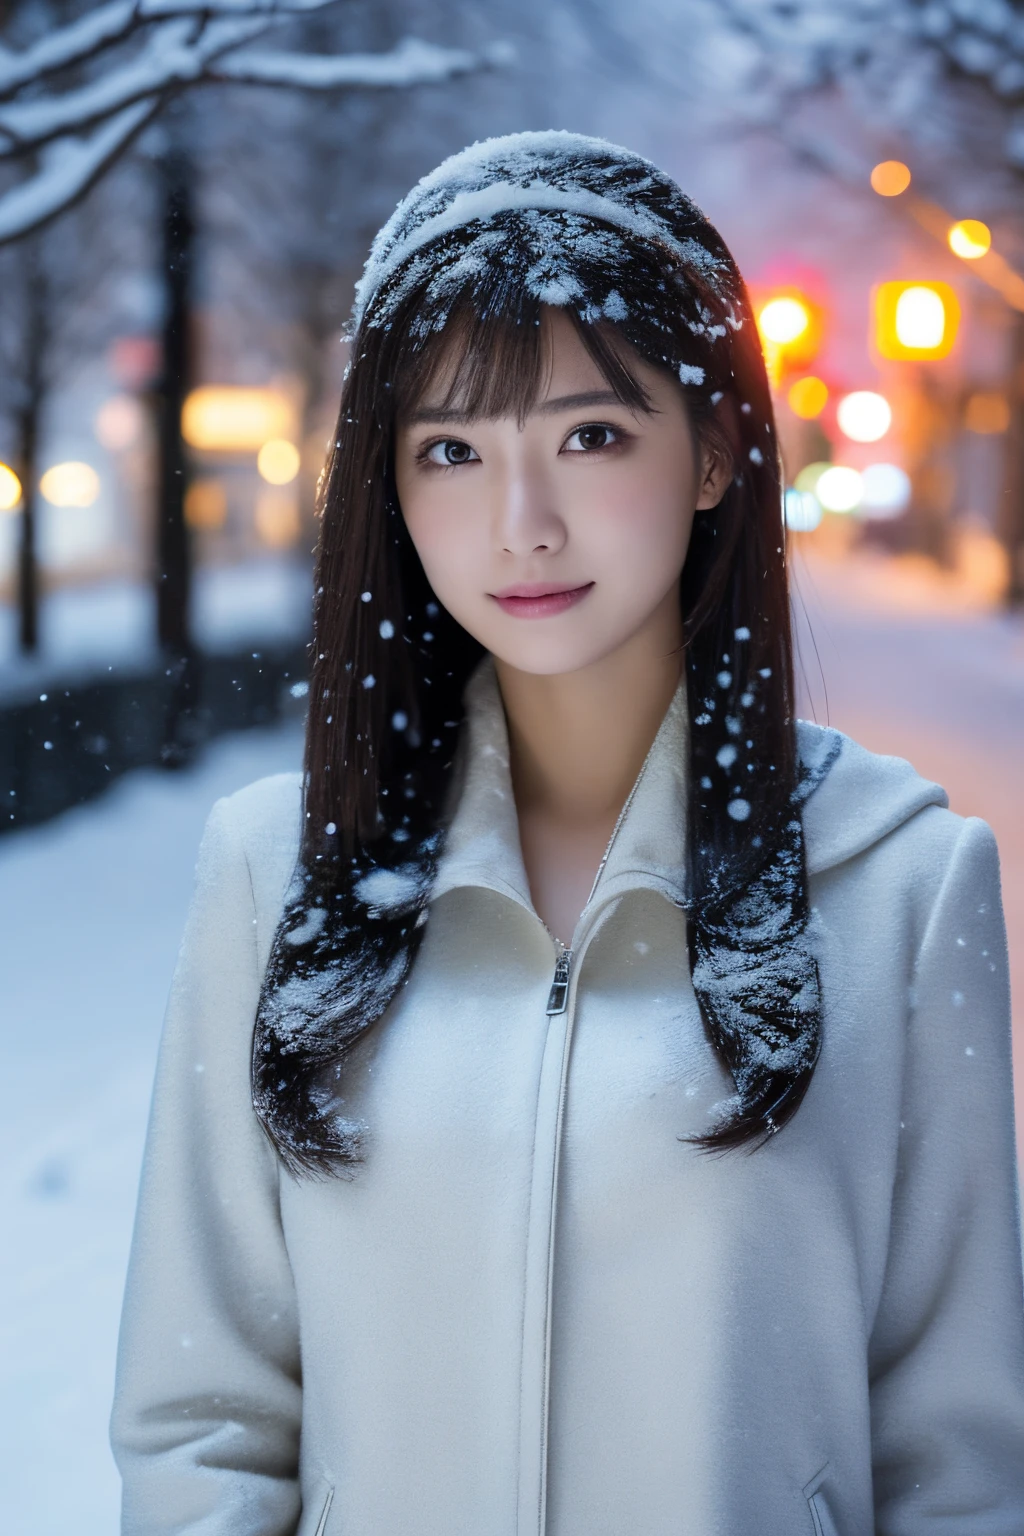 1girl in, (wear a platinum coat:1.2), (Raw photo, Best Quality), (Realistic, Photorealsitic:1.4), masutepiece, Extremely delicate and beautiful, Extremely detailed, 2k wallpaper, amazing, finely detail, the Extremely Detailed CG Unity 8K Wallpapers, Ultra-detailed, hight resolution, Soft light, Beautiful detailed girl, extremely detailed eye and face, beautiful detailed nose, Beautiful detailed eyes, Cinematic lighting, Illuminations coloring the city on a snowy night, (Illumination of street trees covered with snow like frost-covered trees:1.4), Snowy landscape, It's snowing, There&#39;There&#39;There&#39;There&#39;There&#39;There&#39;There&#39;There&#39;s snow in my hair, Perfect Anatomy, Slender body, Taut, 
Straight semi-long hair, Bangs, Looking at Viewer, A slight smil